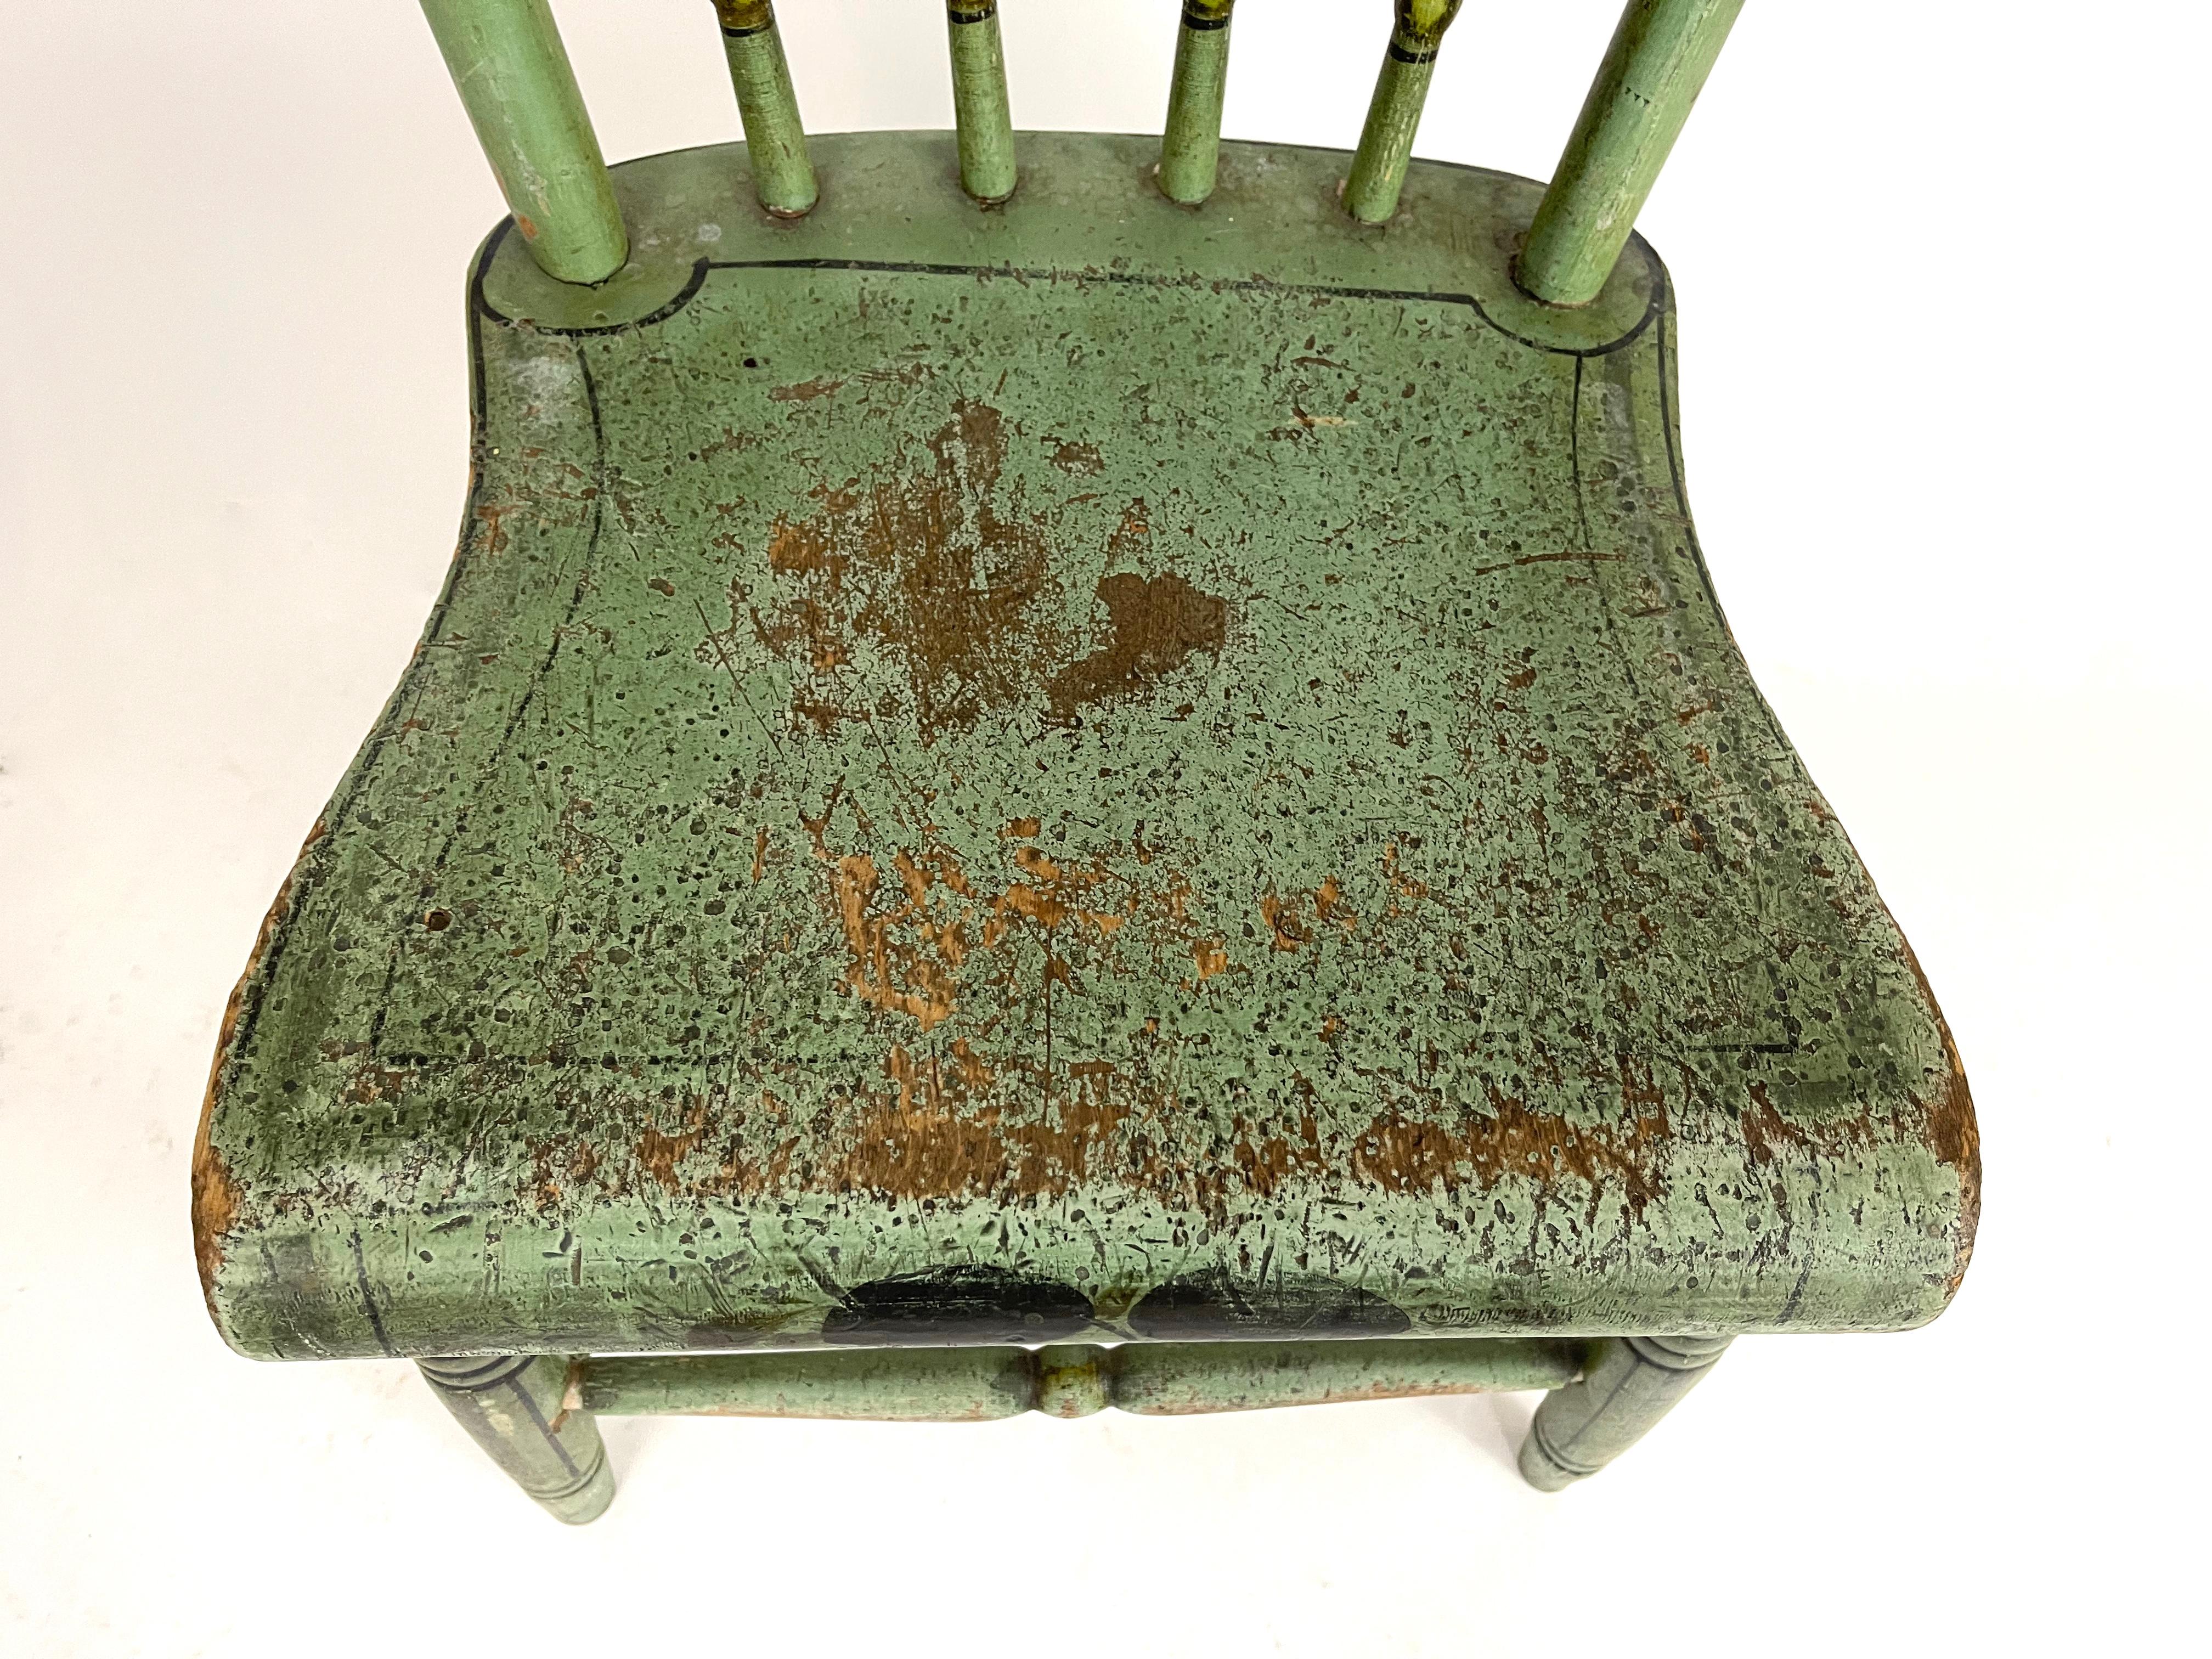 Set of 6 19th Century American Country Green Painted Dining Chairs, c. 1820-30 6